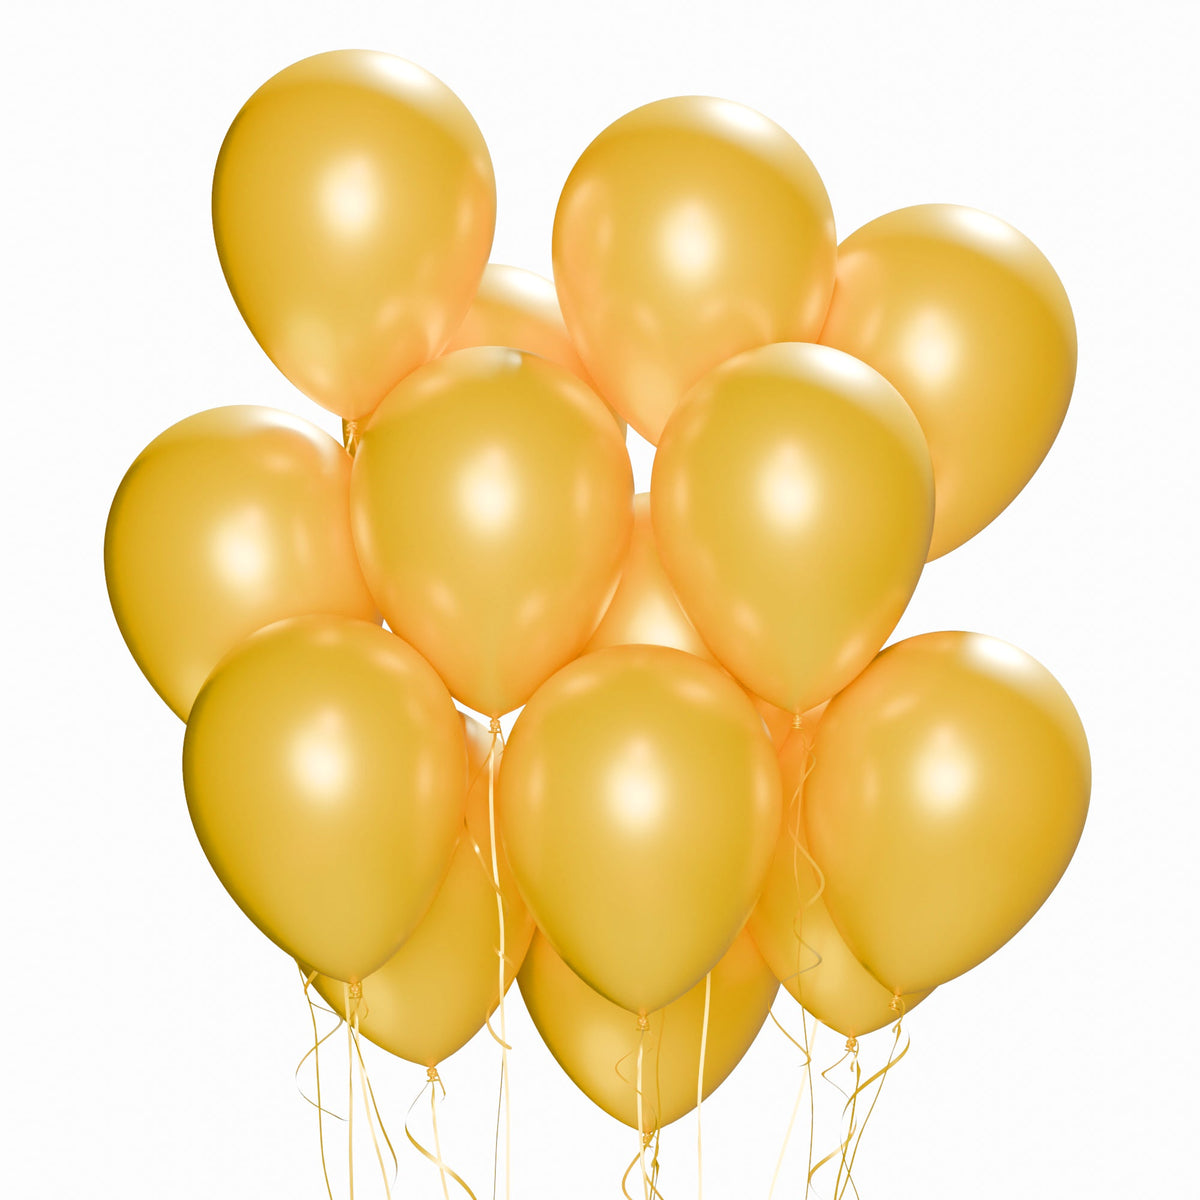 WIDE OCEAN INTERNATIONAL TRADE BEIJING CO., LTD Balloons Gold Latex Balloon 12 Inches, Pearl Collection, 15 Count 810064198328